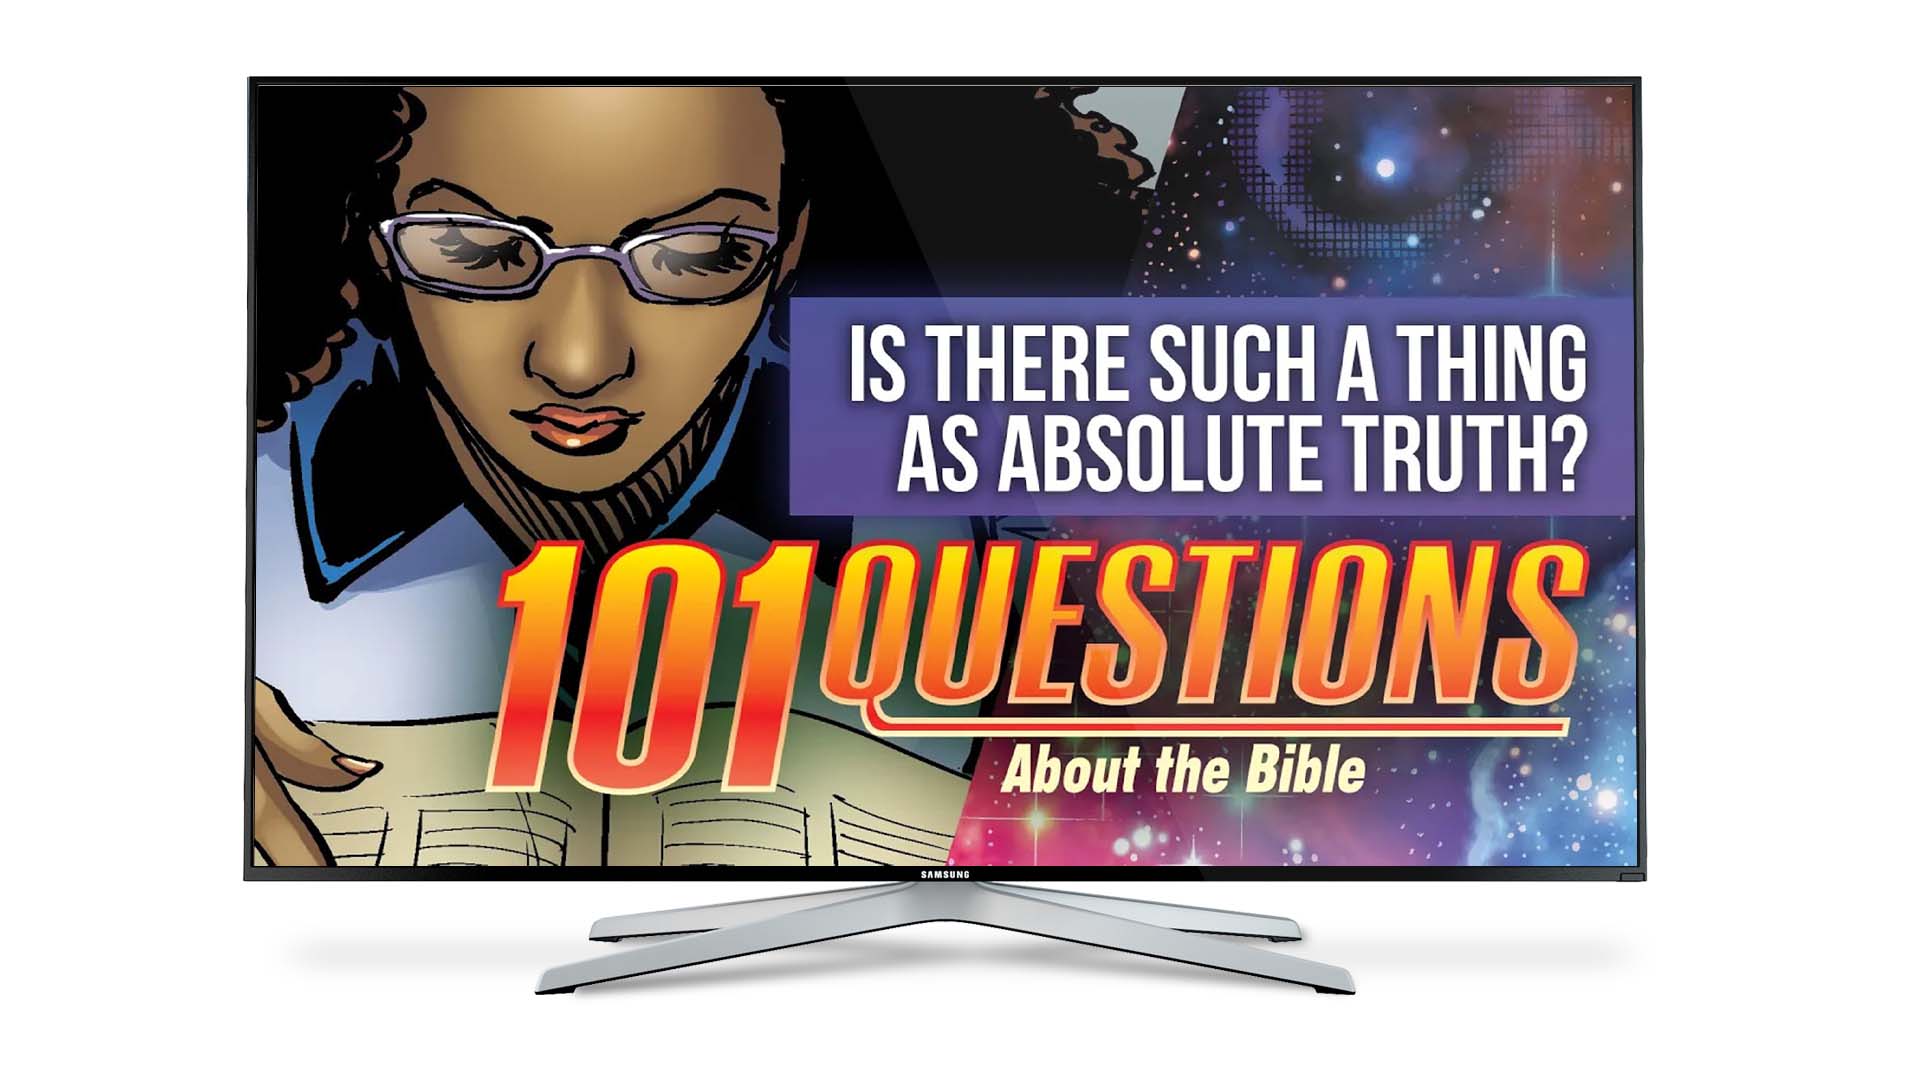 Motion Comic: 101 Questions #11 - Is there such a thing as universal truth?